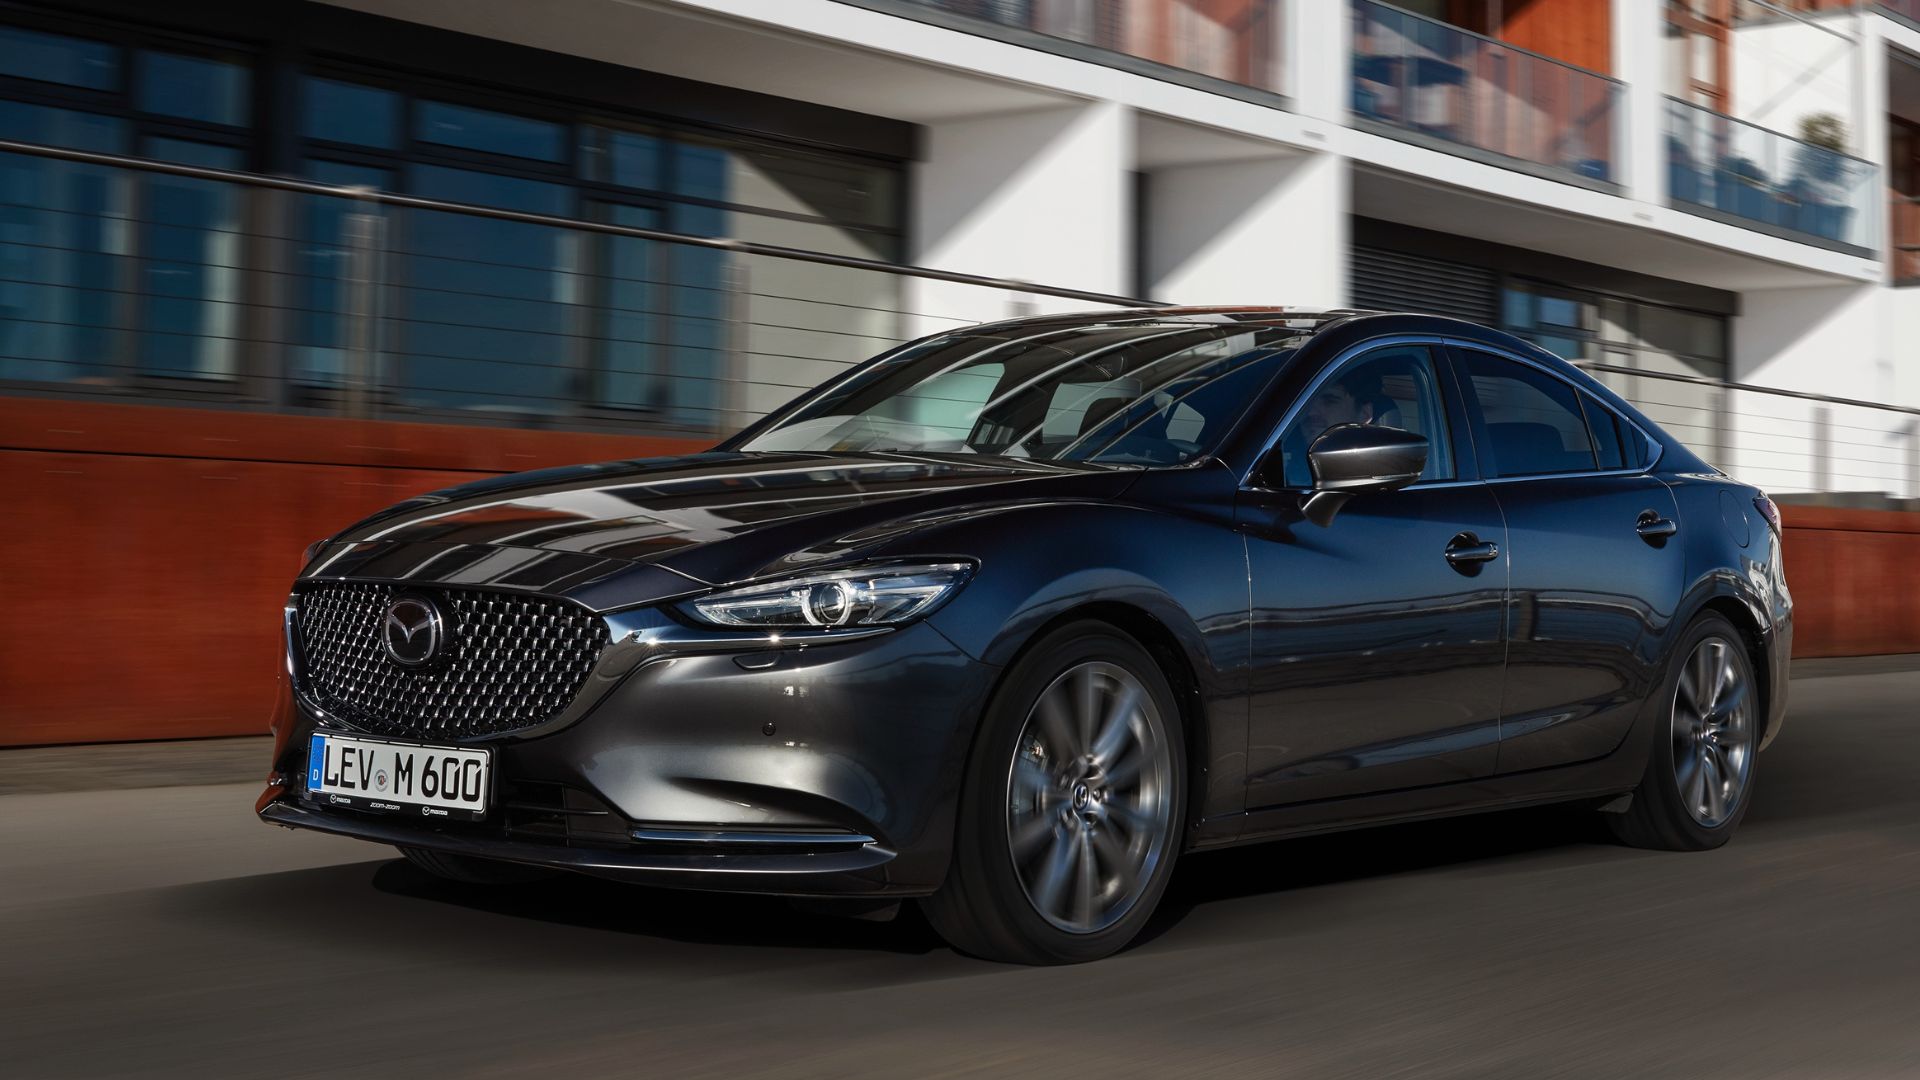 mazda 6 sedan to be discontinued in japan; ph allocation will be unaffected